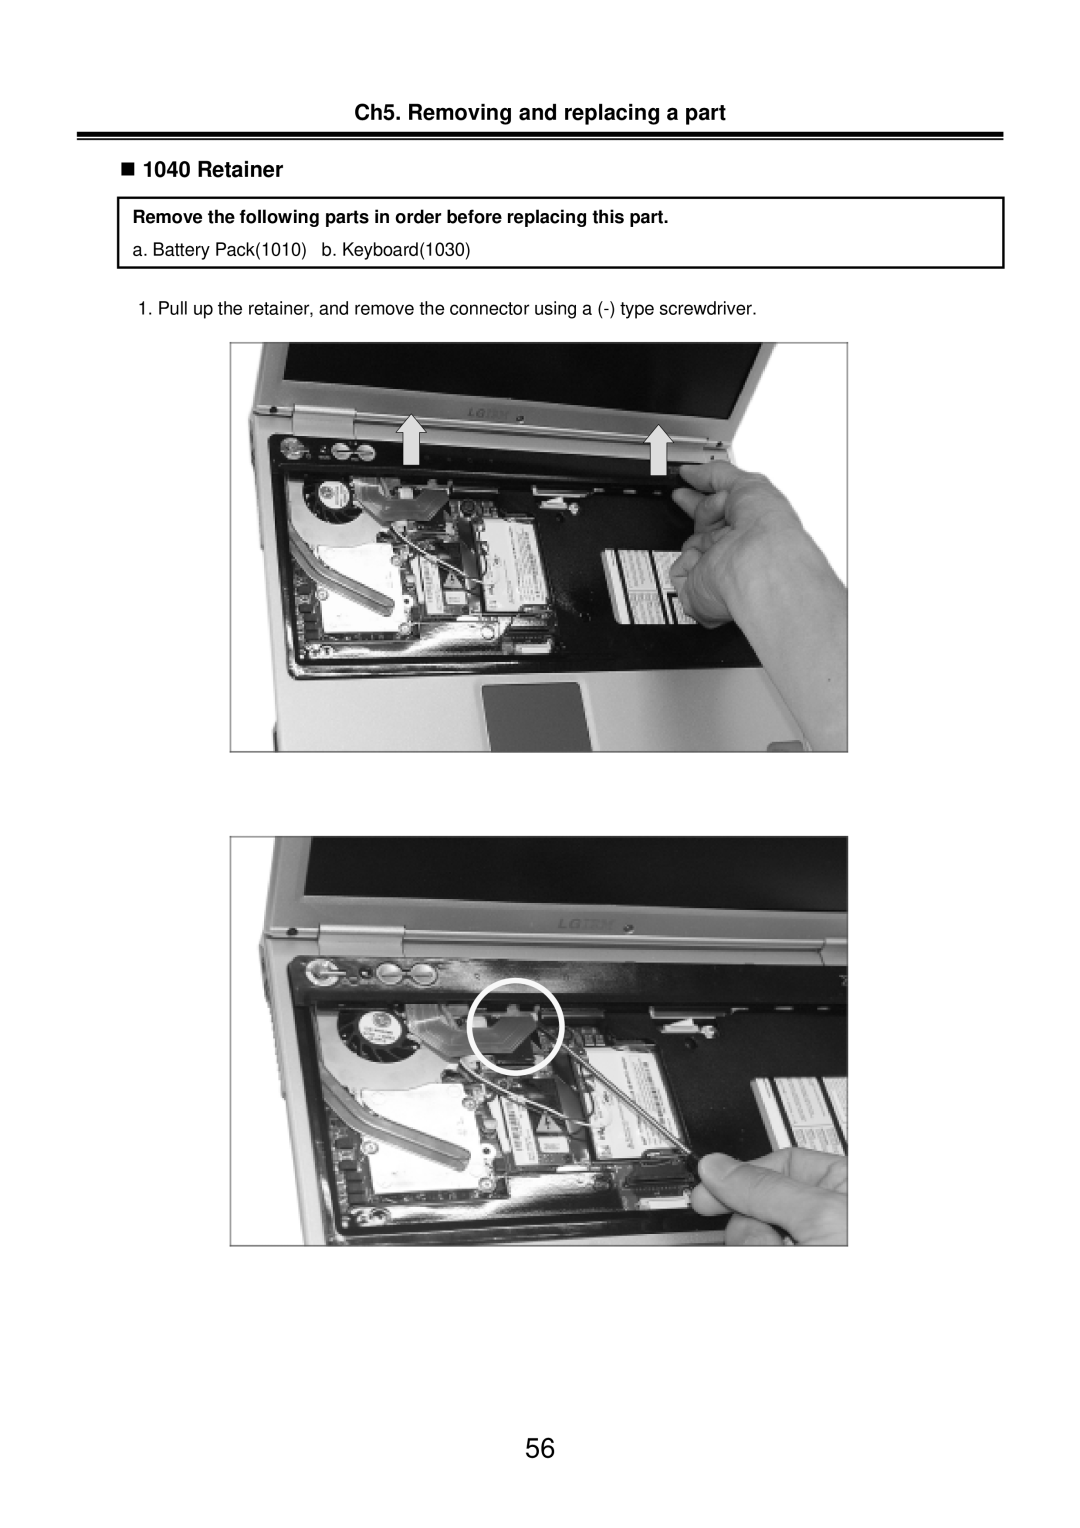 LG Electronics LM50 service manual Ch5. Removing and replacing a part „ 1040 Retainer, a. Battery Pack1010 b. Keyboard1030 